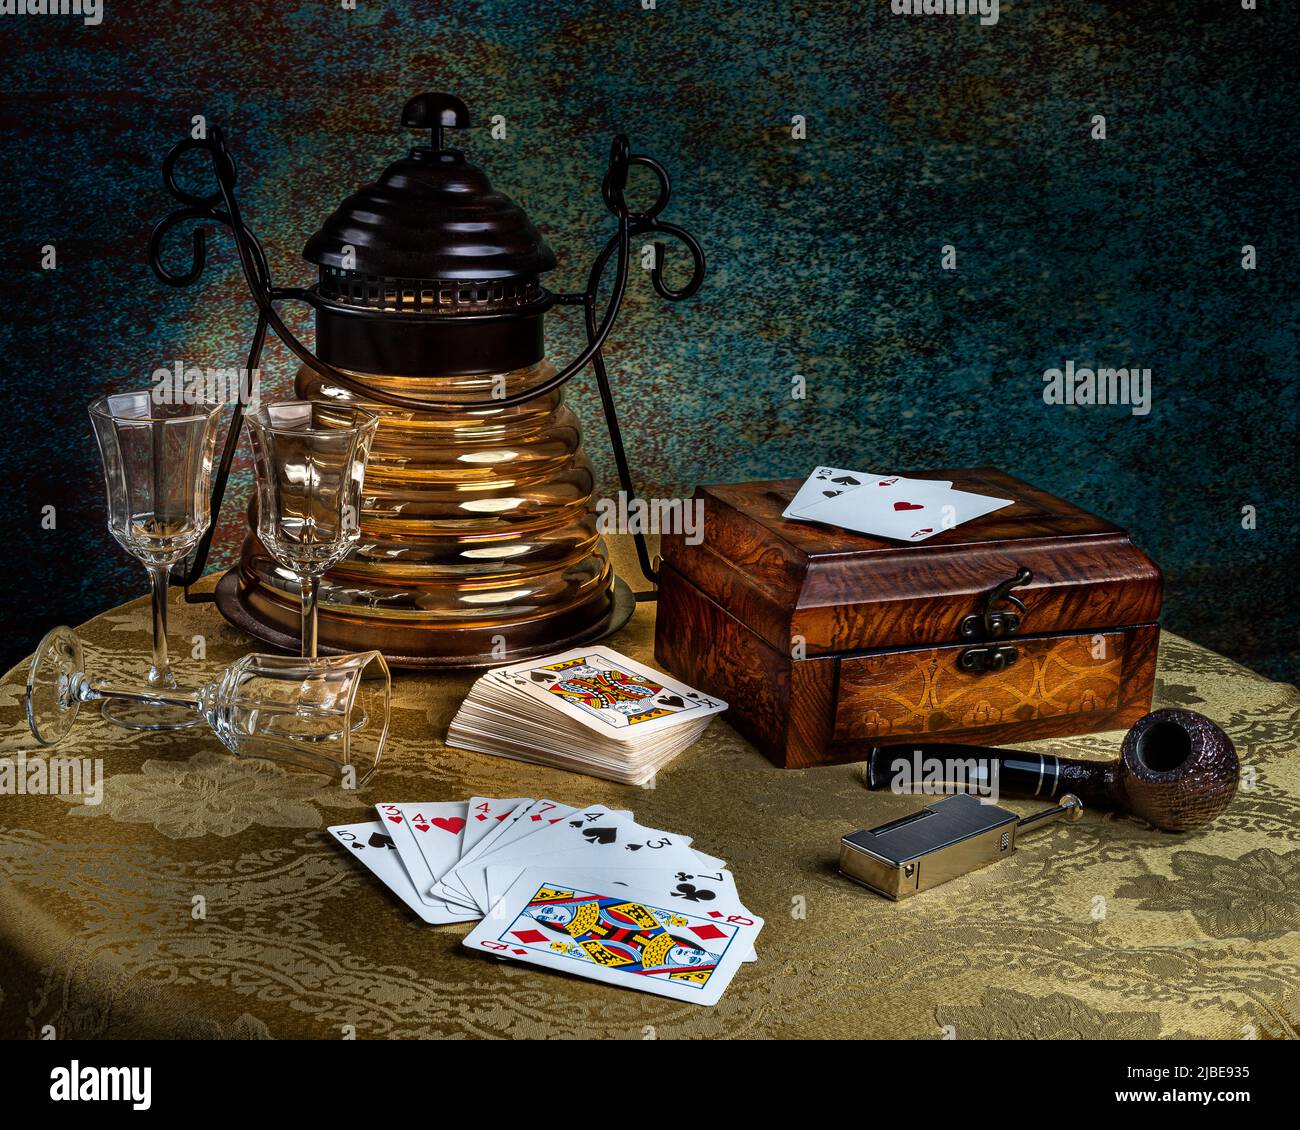 Illustration. A card game scene with a lantern, smoking a pipe and drinking alcohol. Stock Photo